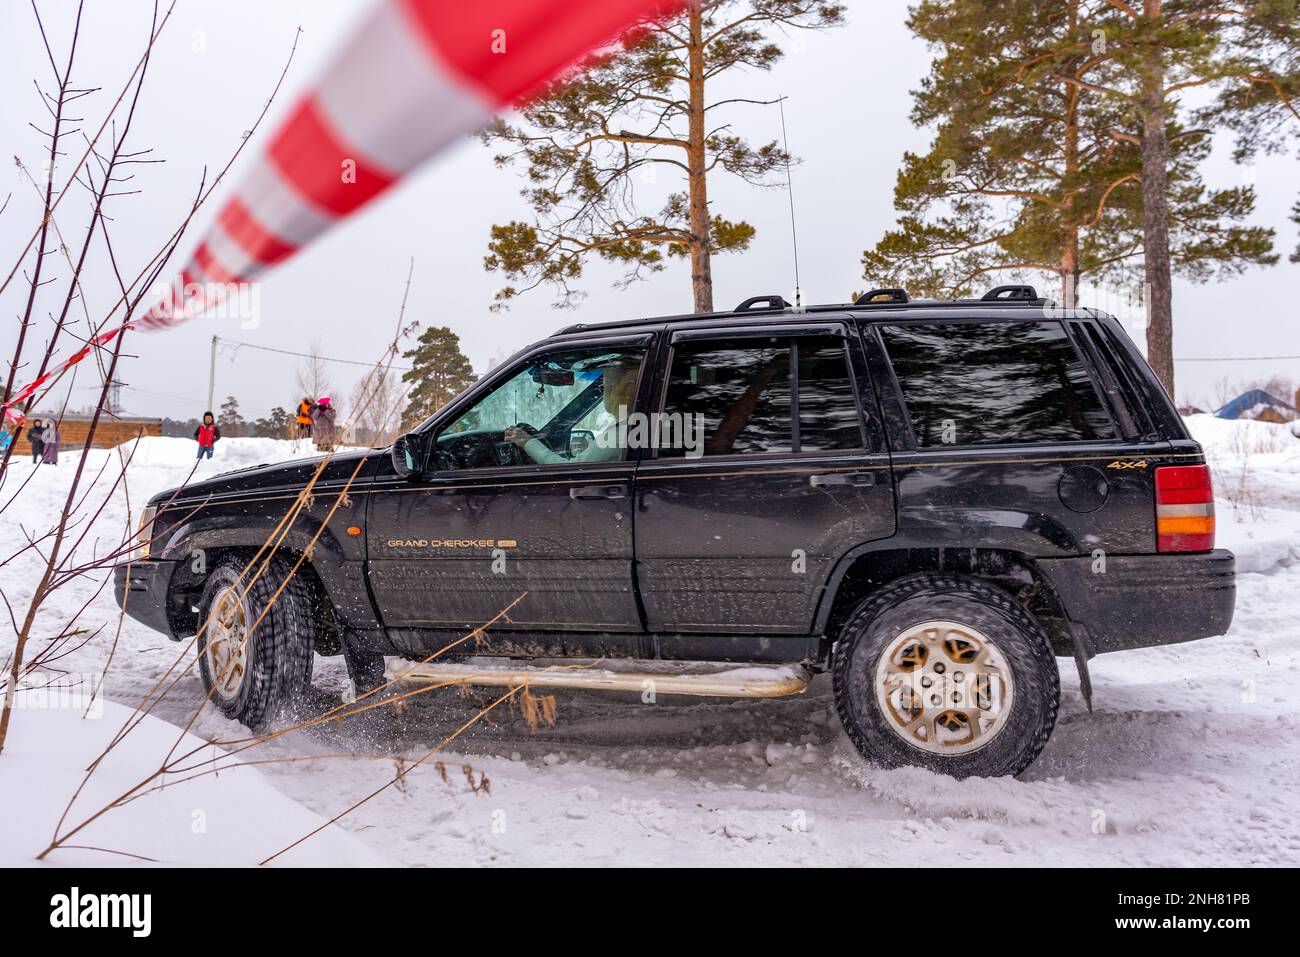 Offroad SUV 'Jeep Grand Cherokee' 4x4 black color rides in winter on snow in the forest among pines and striped tape with a woman driver. Stock Photo